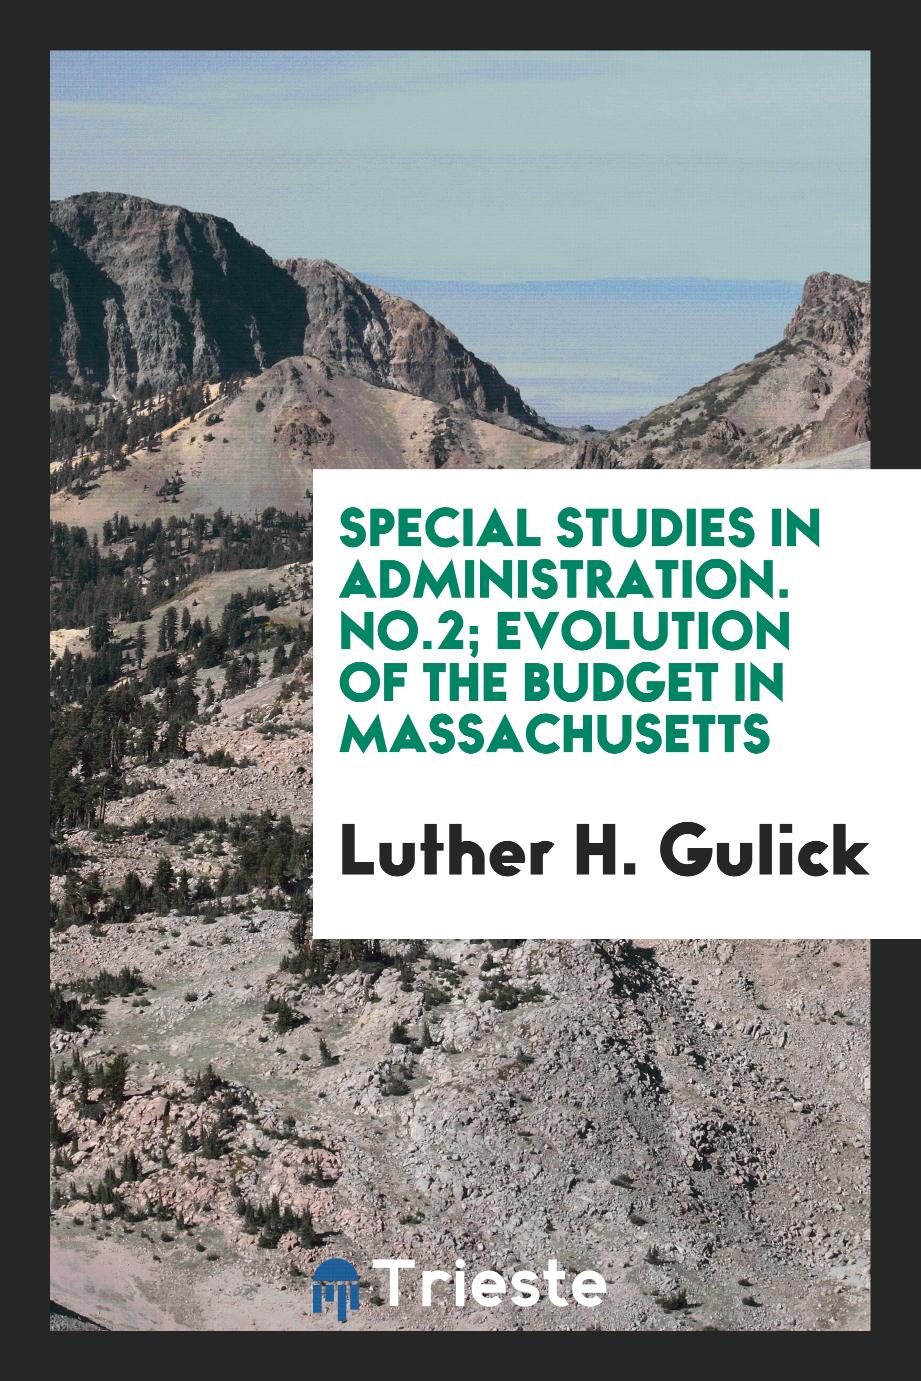 Special studies in administration. No.2; Evolution of the budget in Massachusetts